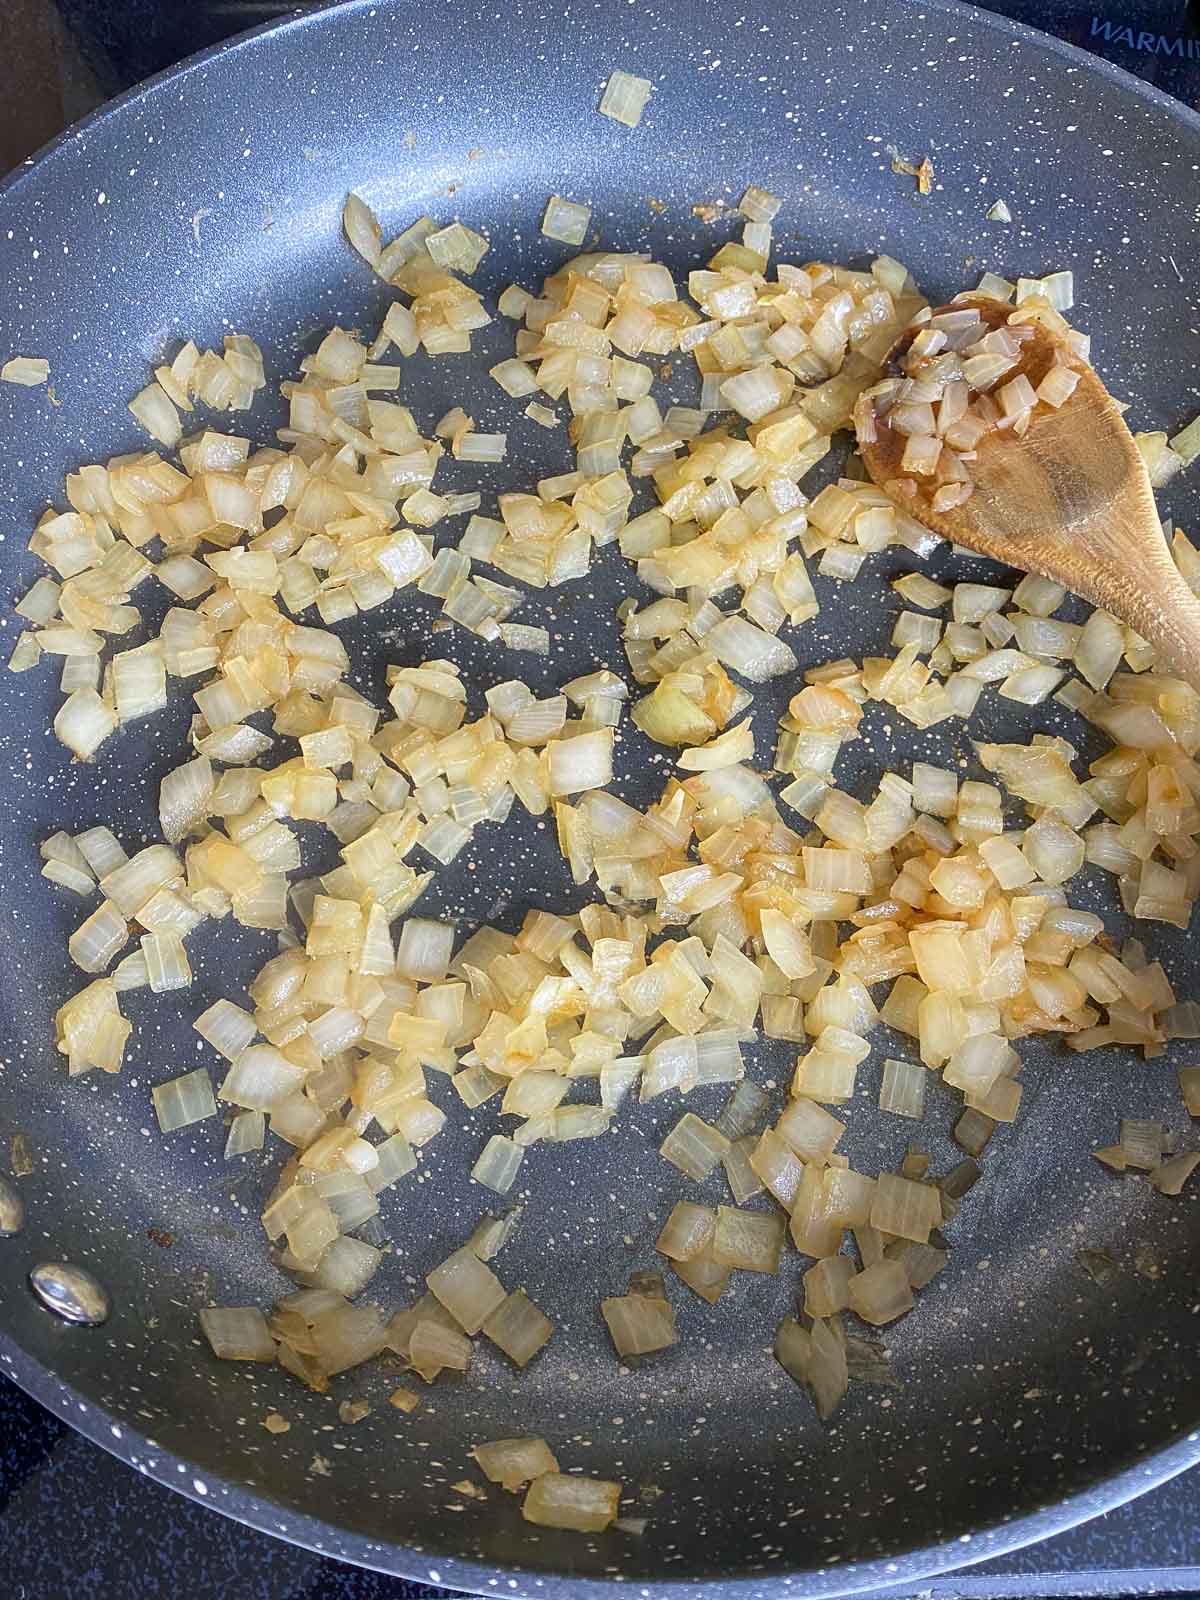 Sauteed onions in a nonstick skillet.